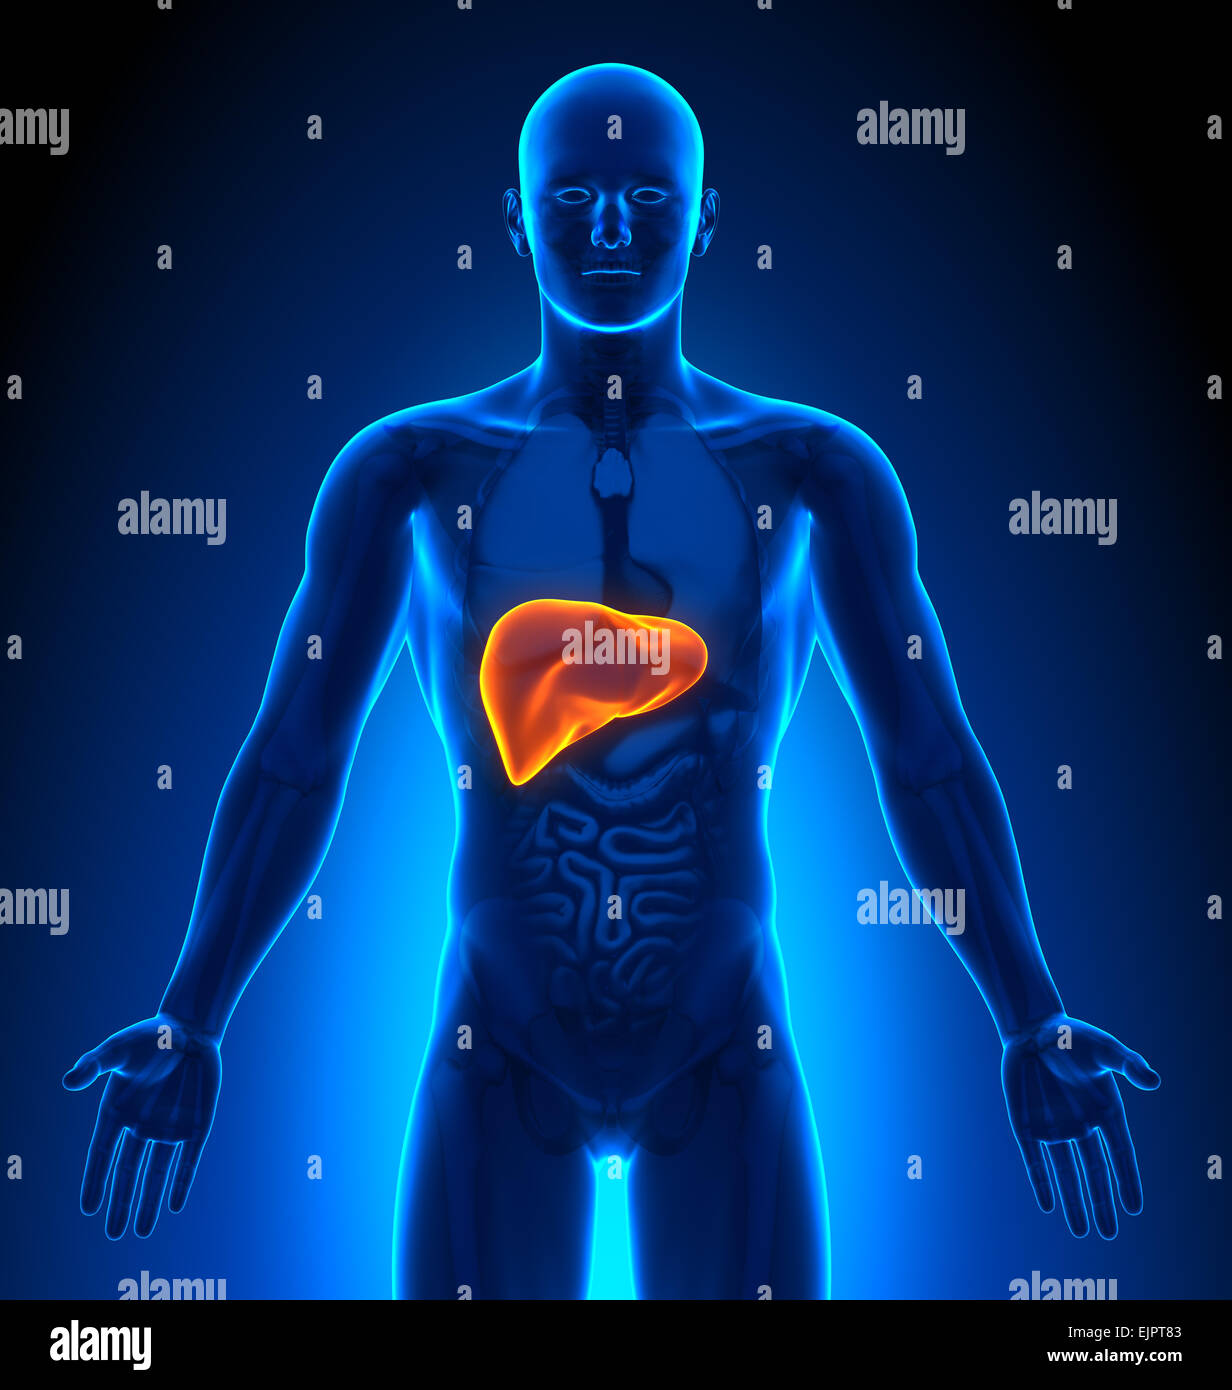 Liver Anatomy High Resolution Stock Photography and Images - Alamy